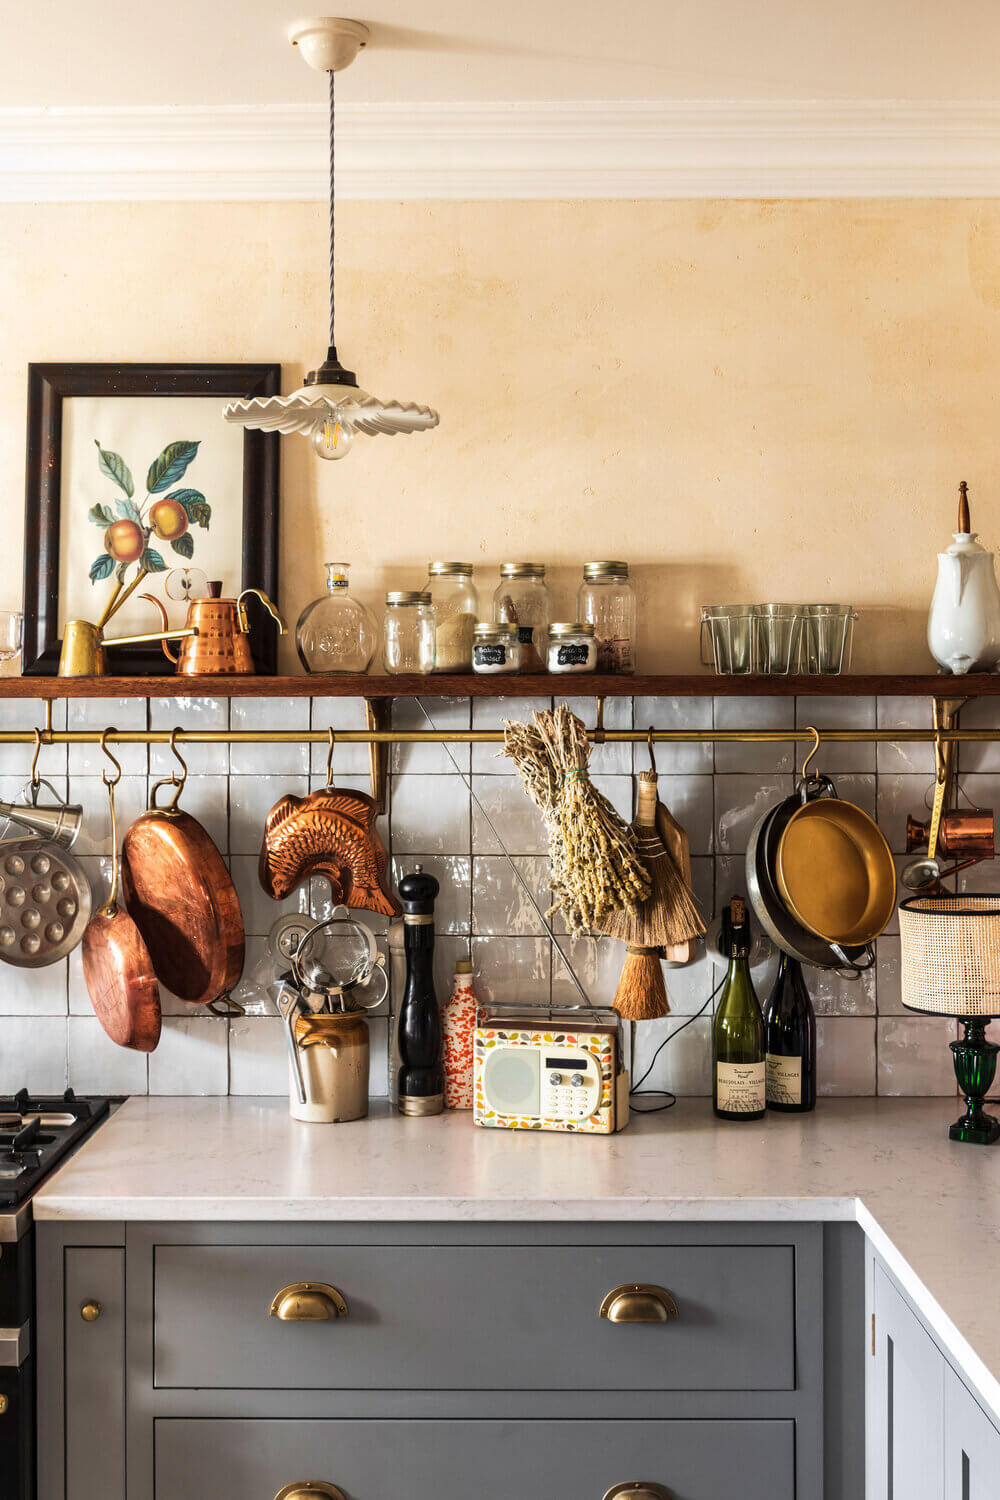 french style devol kitchen nordroom5 A Cozy Cluttered French-Style Kitchen by deVOL